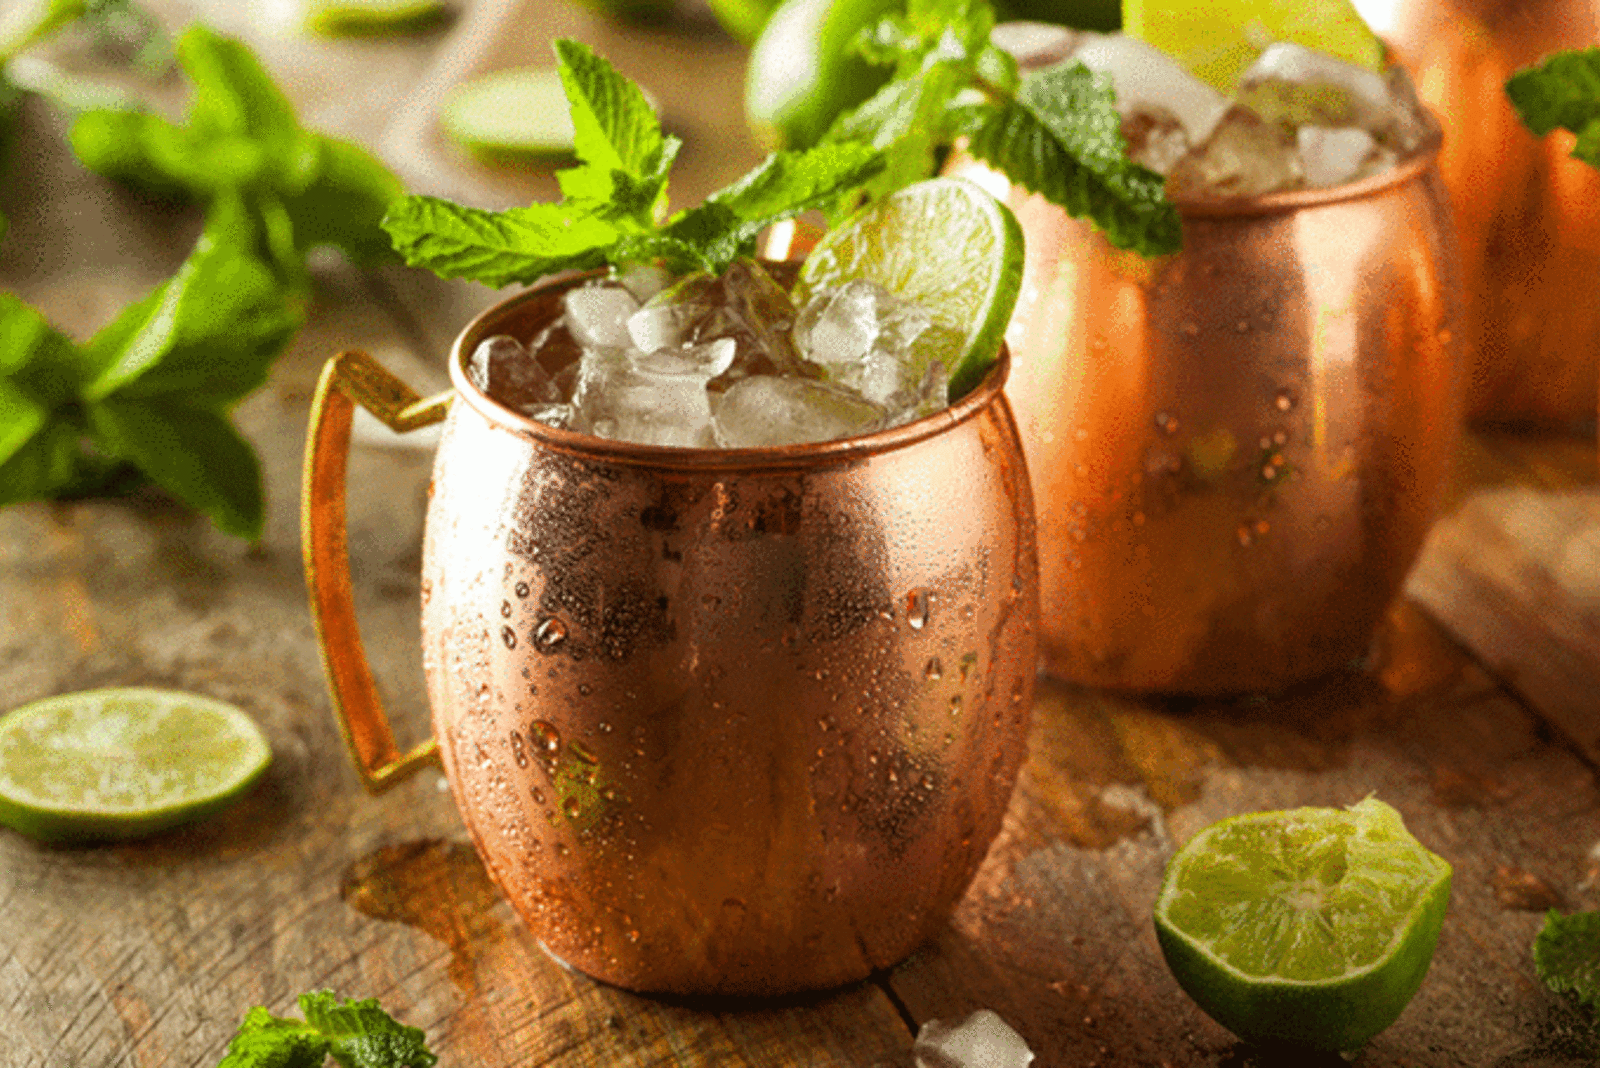 rs-moscow-mule-cocktail-shutterstock_277767530.gif